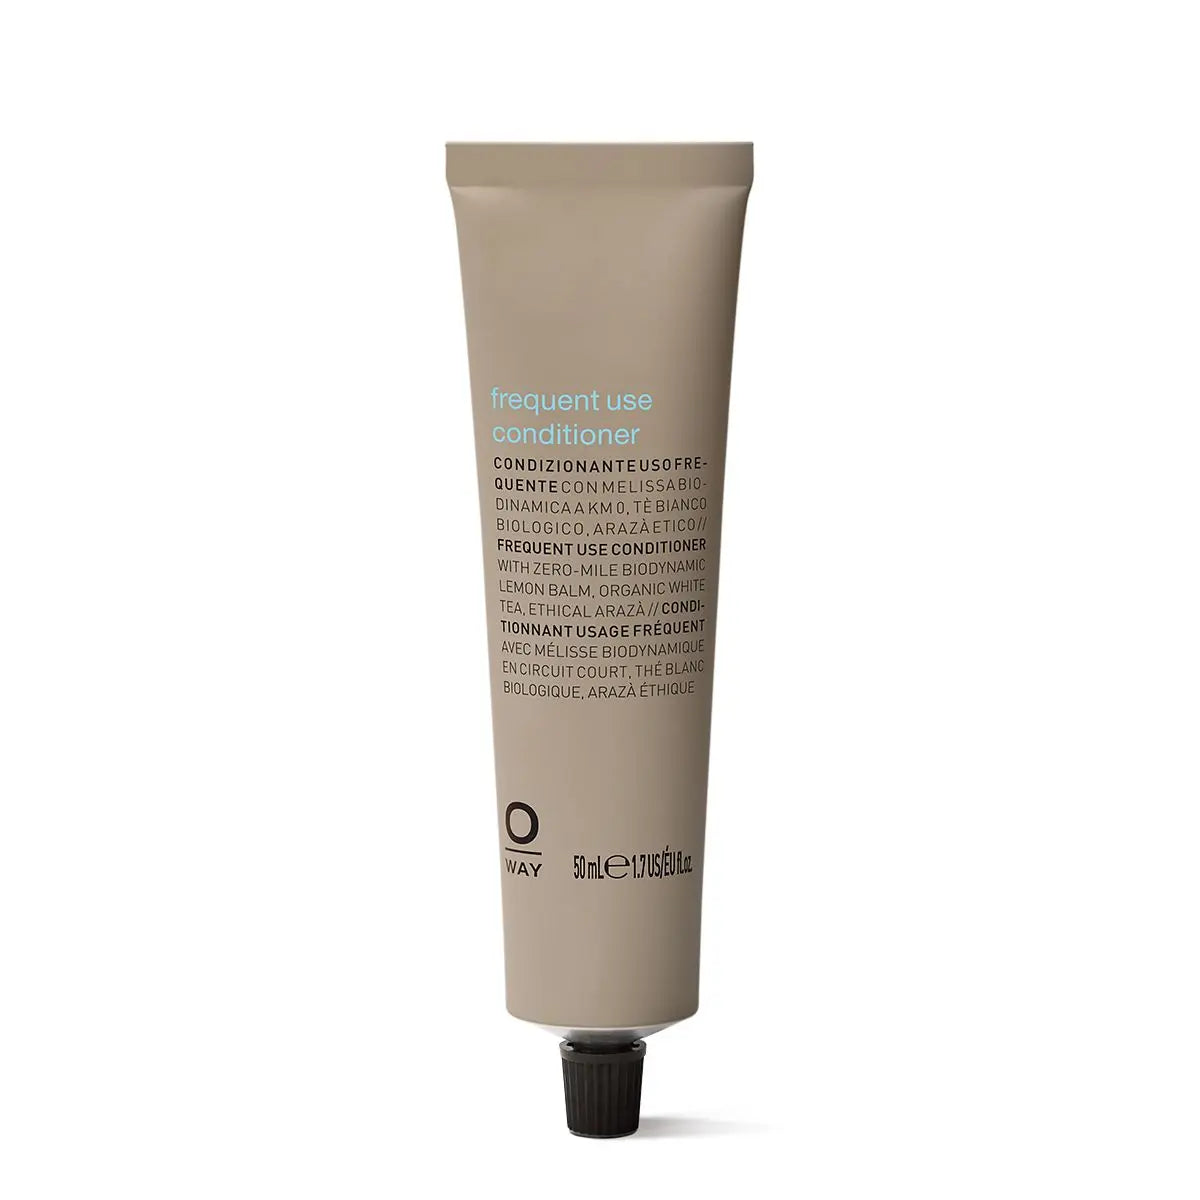 DAILY ACT Frequent Use Conditioner